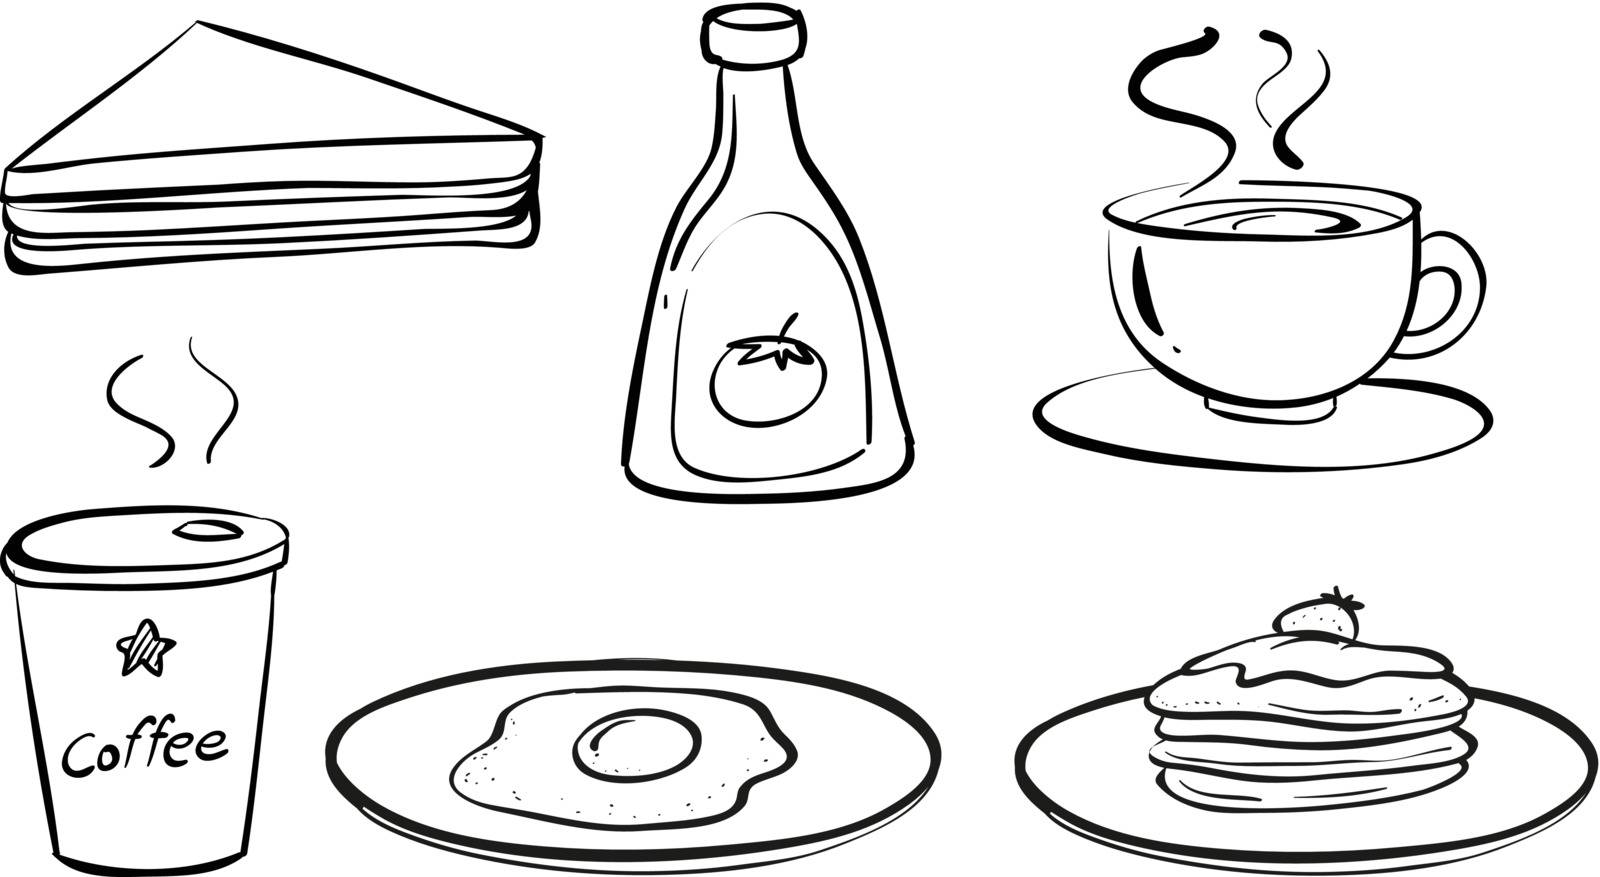 Illustration of the foods and drinks for breakfast on a white background